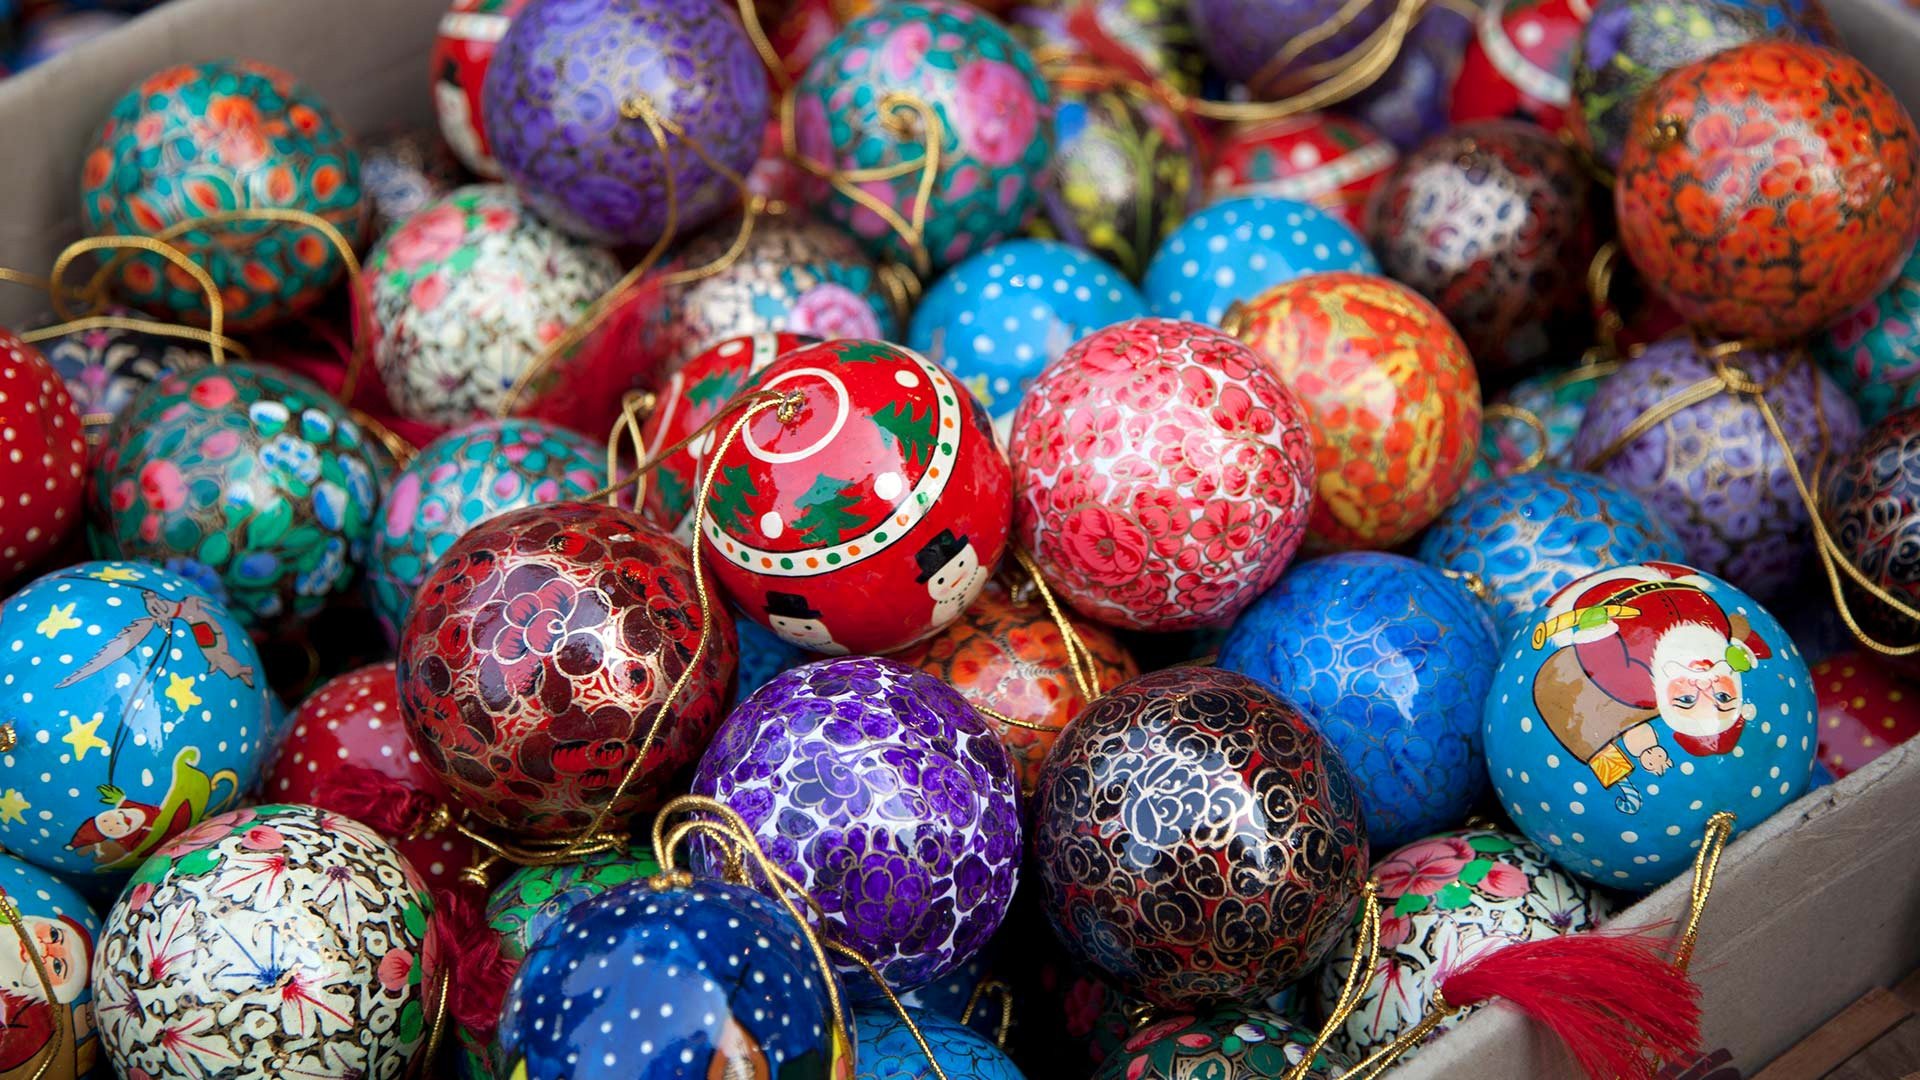 Awesome Christmas Ornaments/Decorations free wallpaper ID:434341 for full hd 1920x1080 desktop